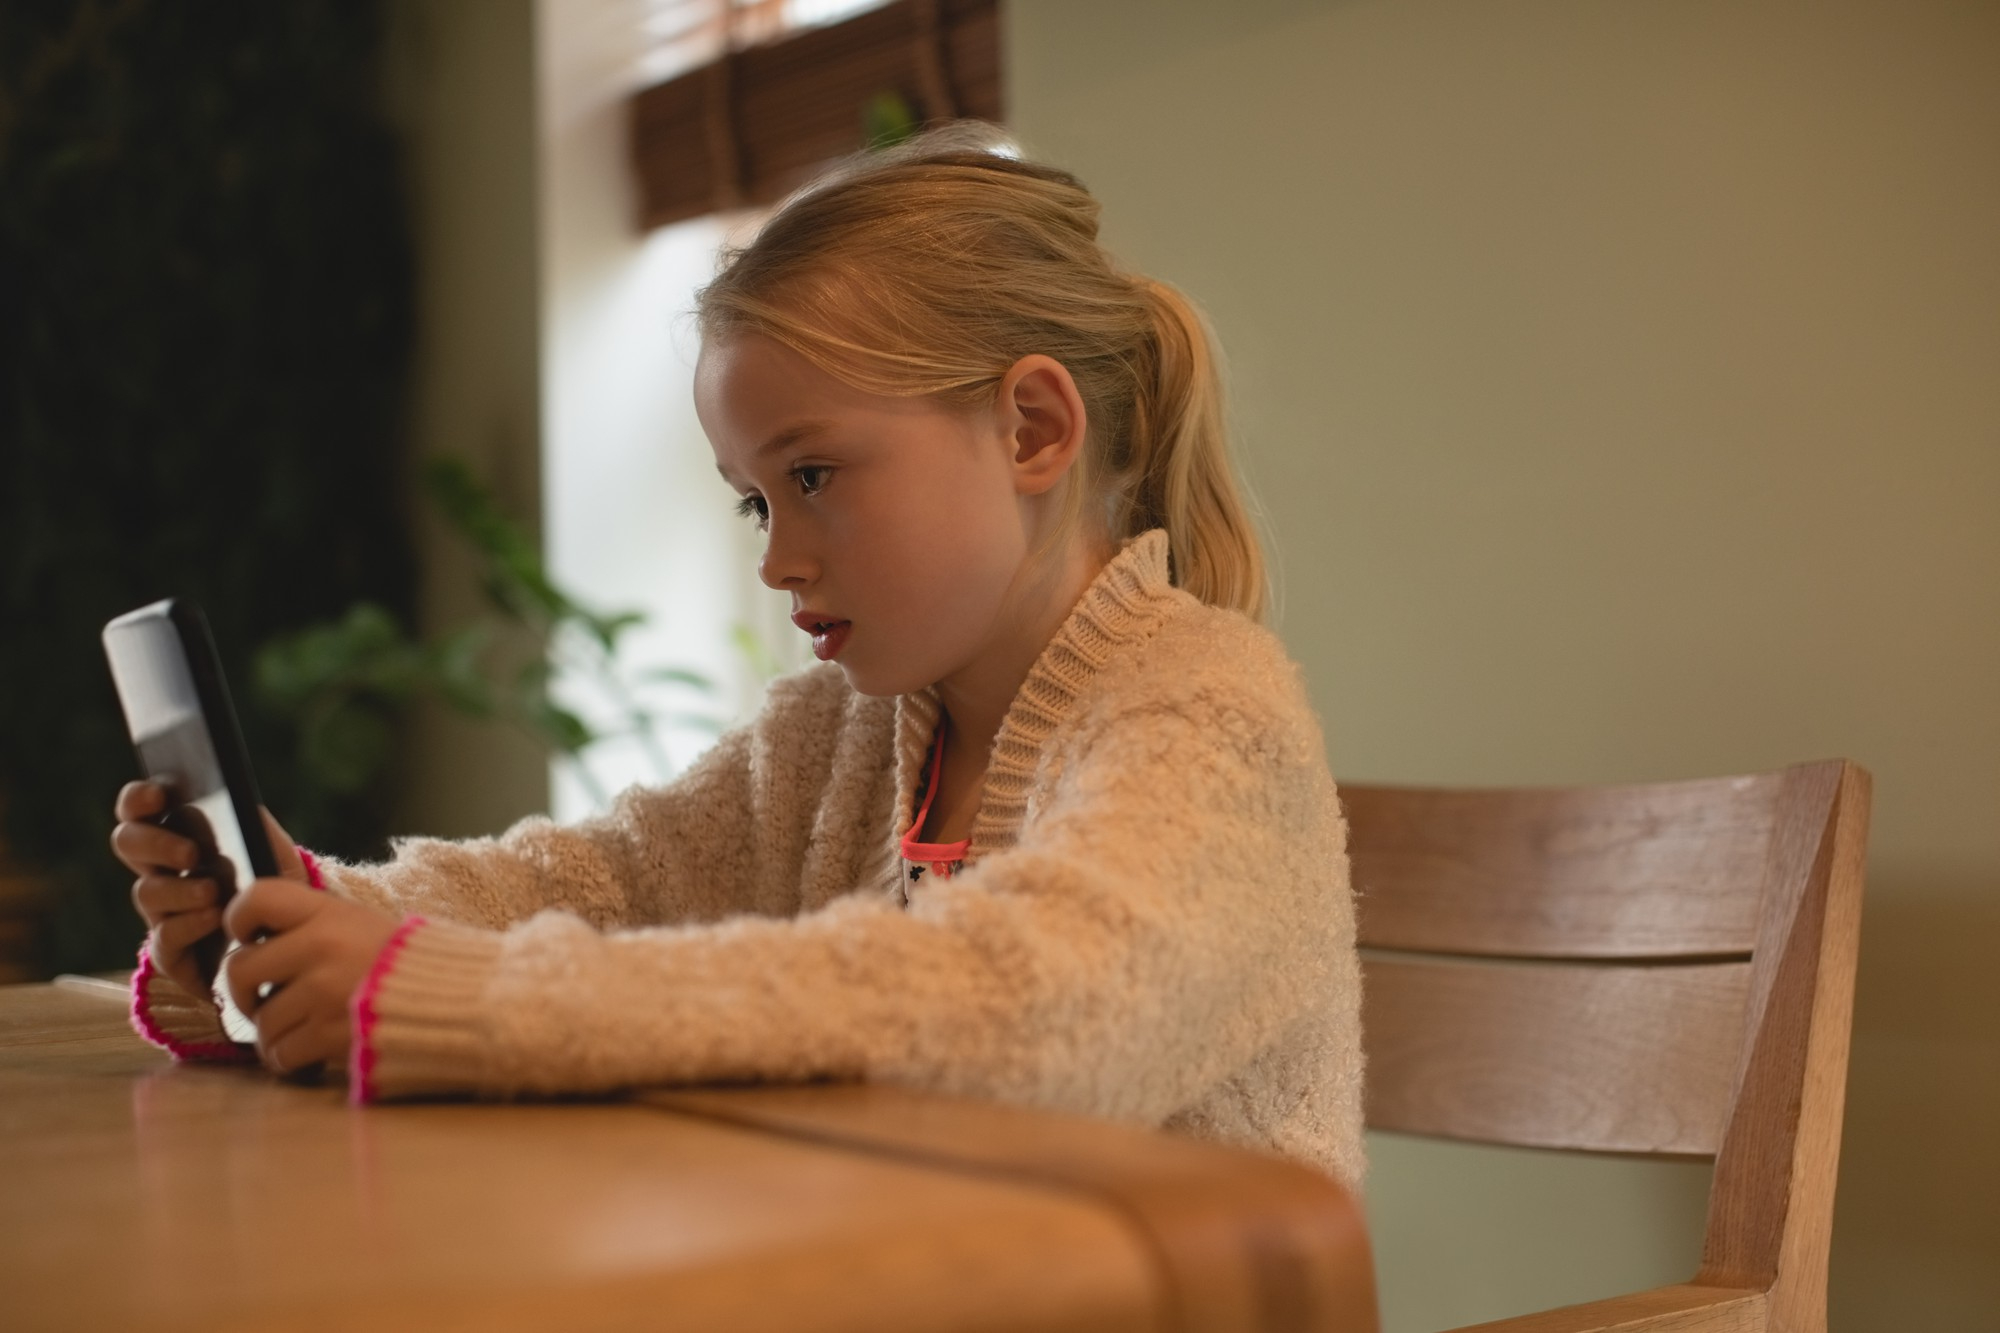 A little girl using a phone while seated at a table | Source: Freepik